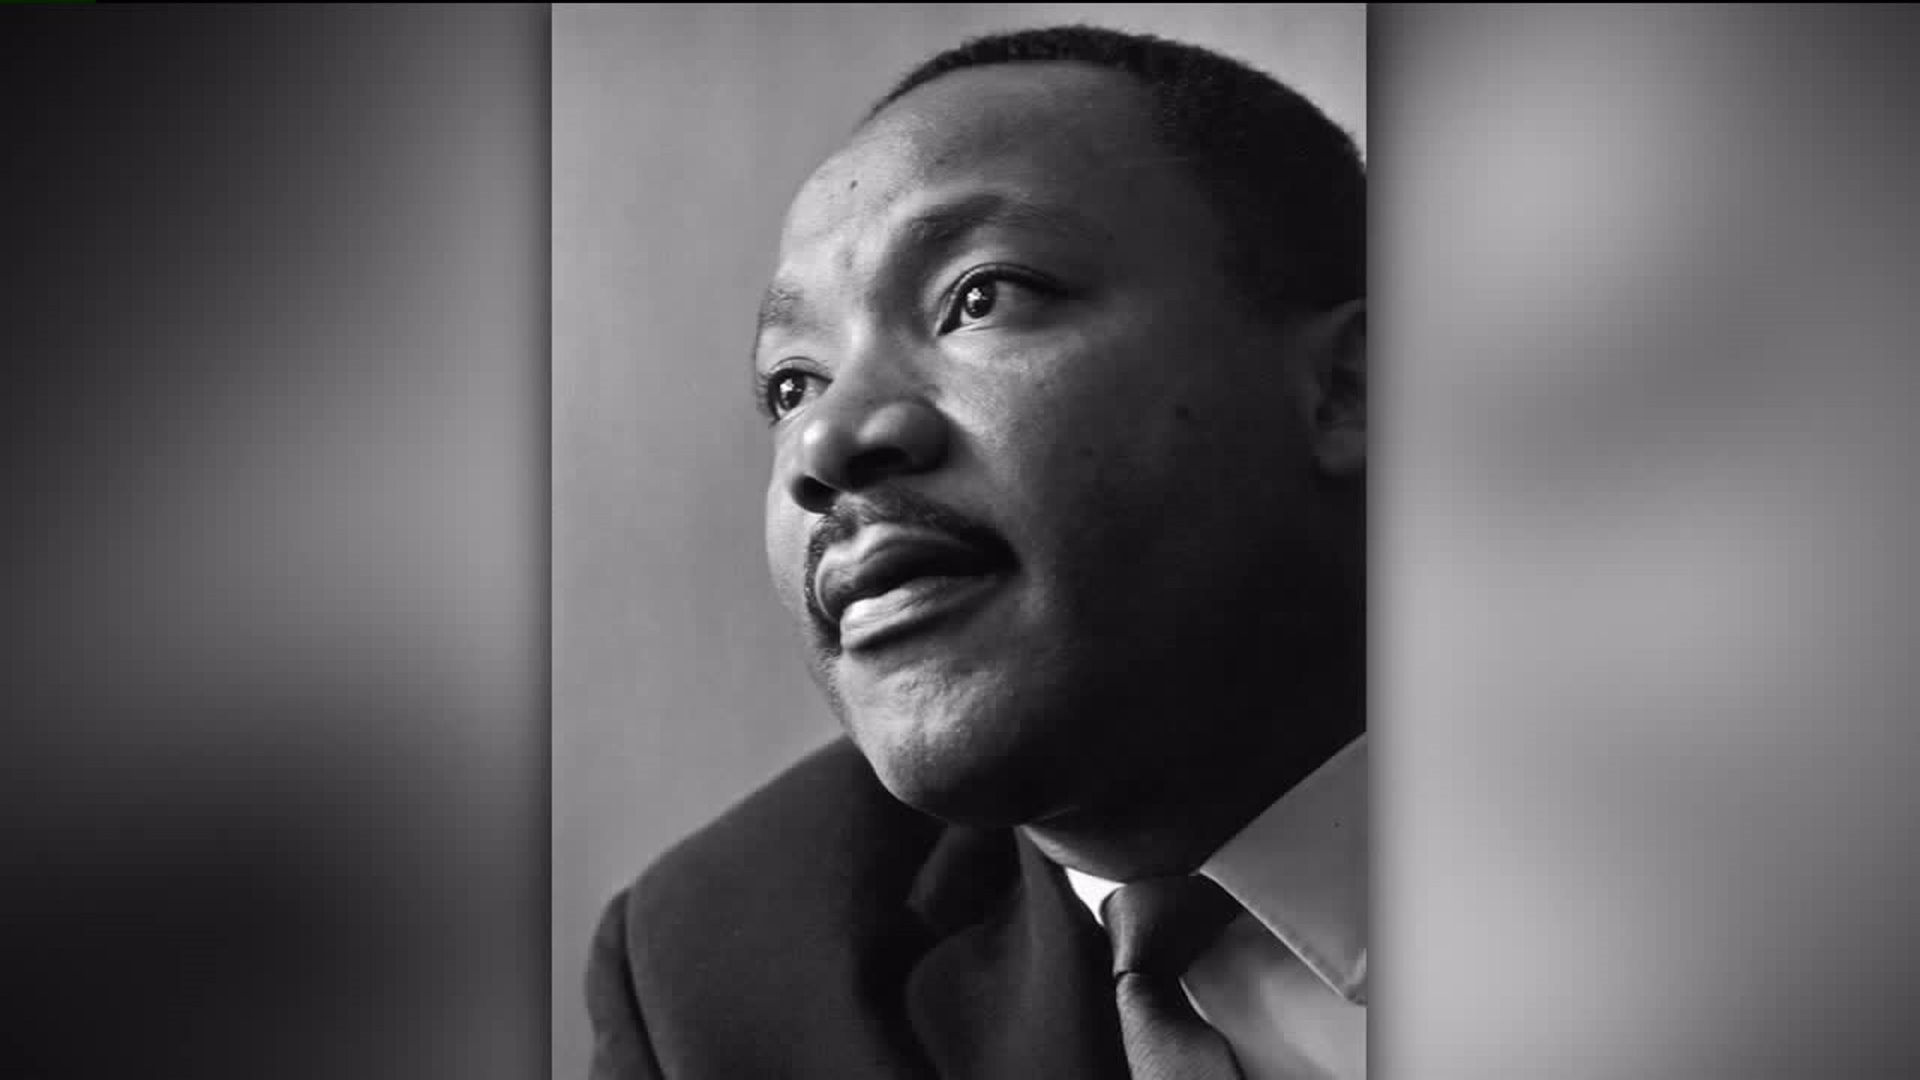 Students Honor Dr. King's Legacy During Global Week